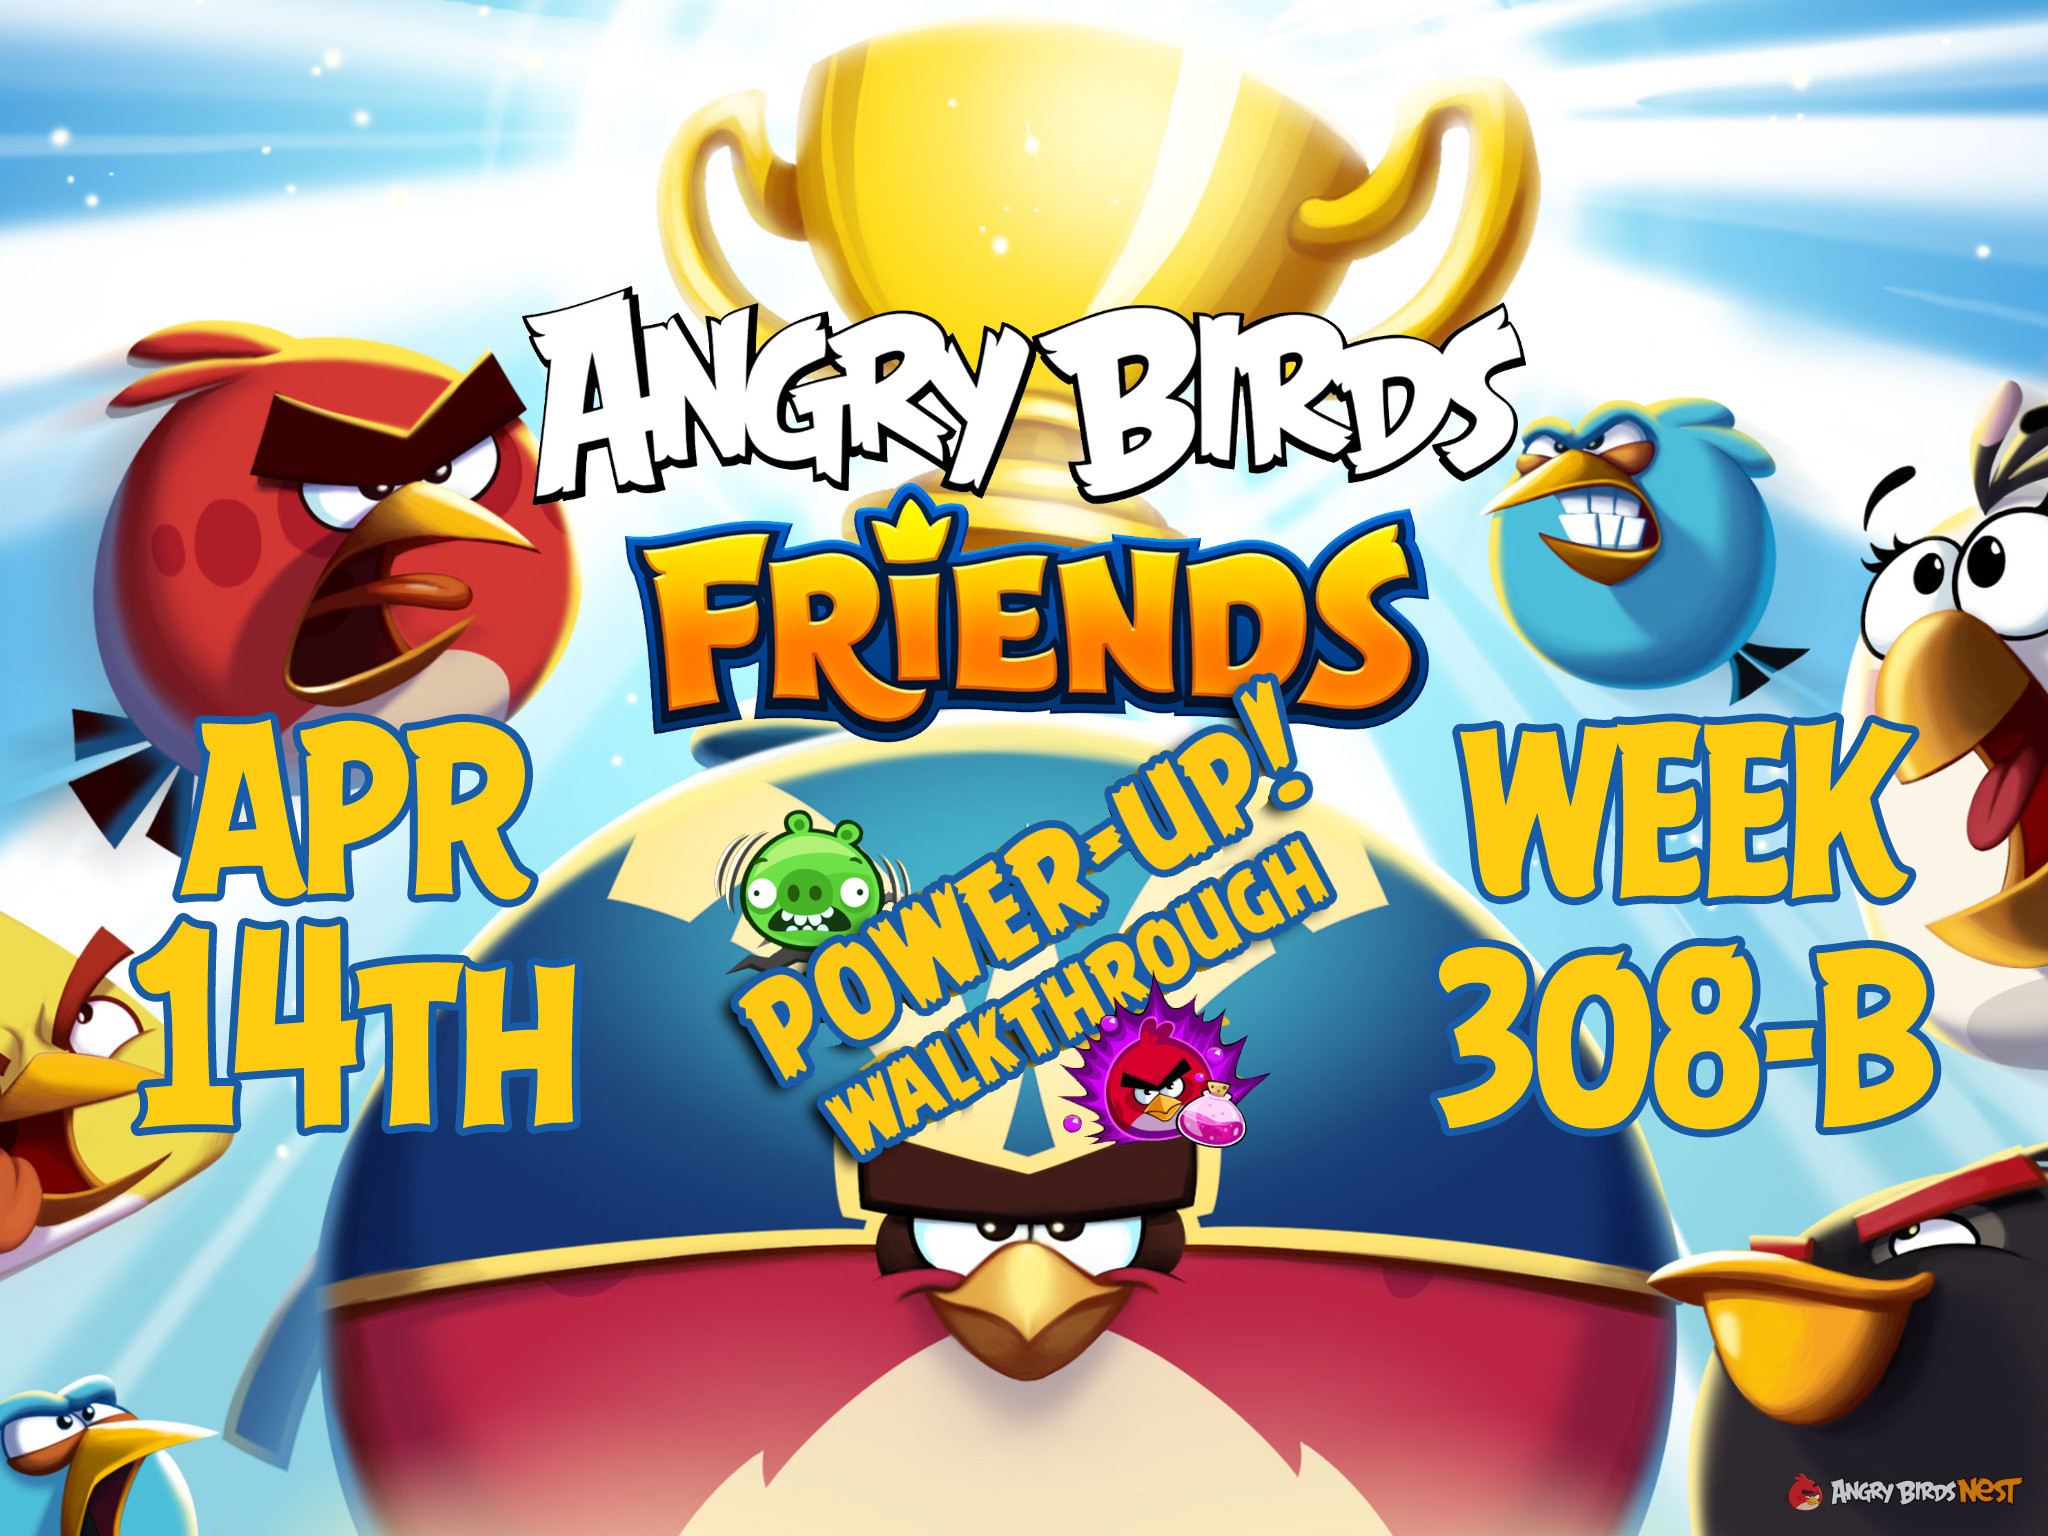 Angry Birds Friends Tournament Week 308-B Feature Image PU